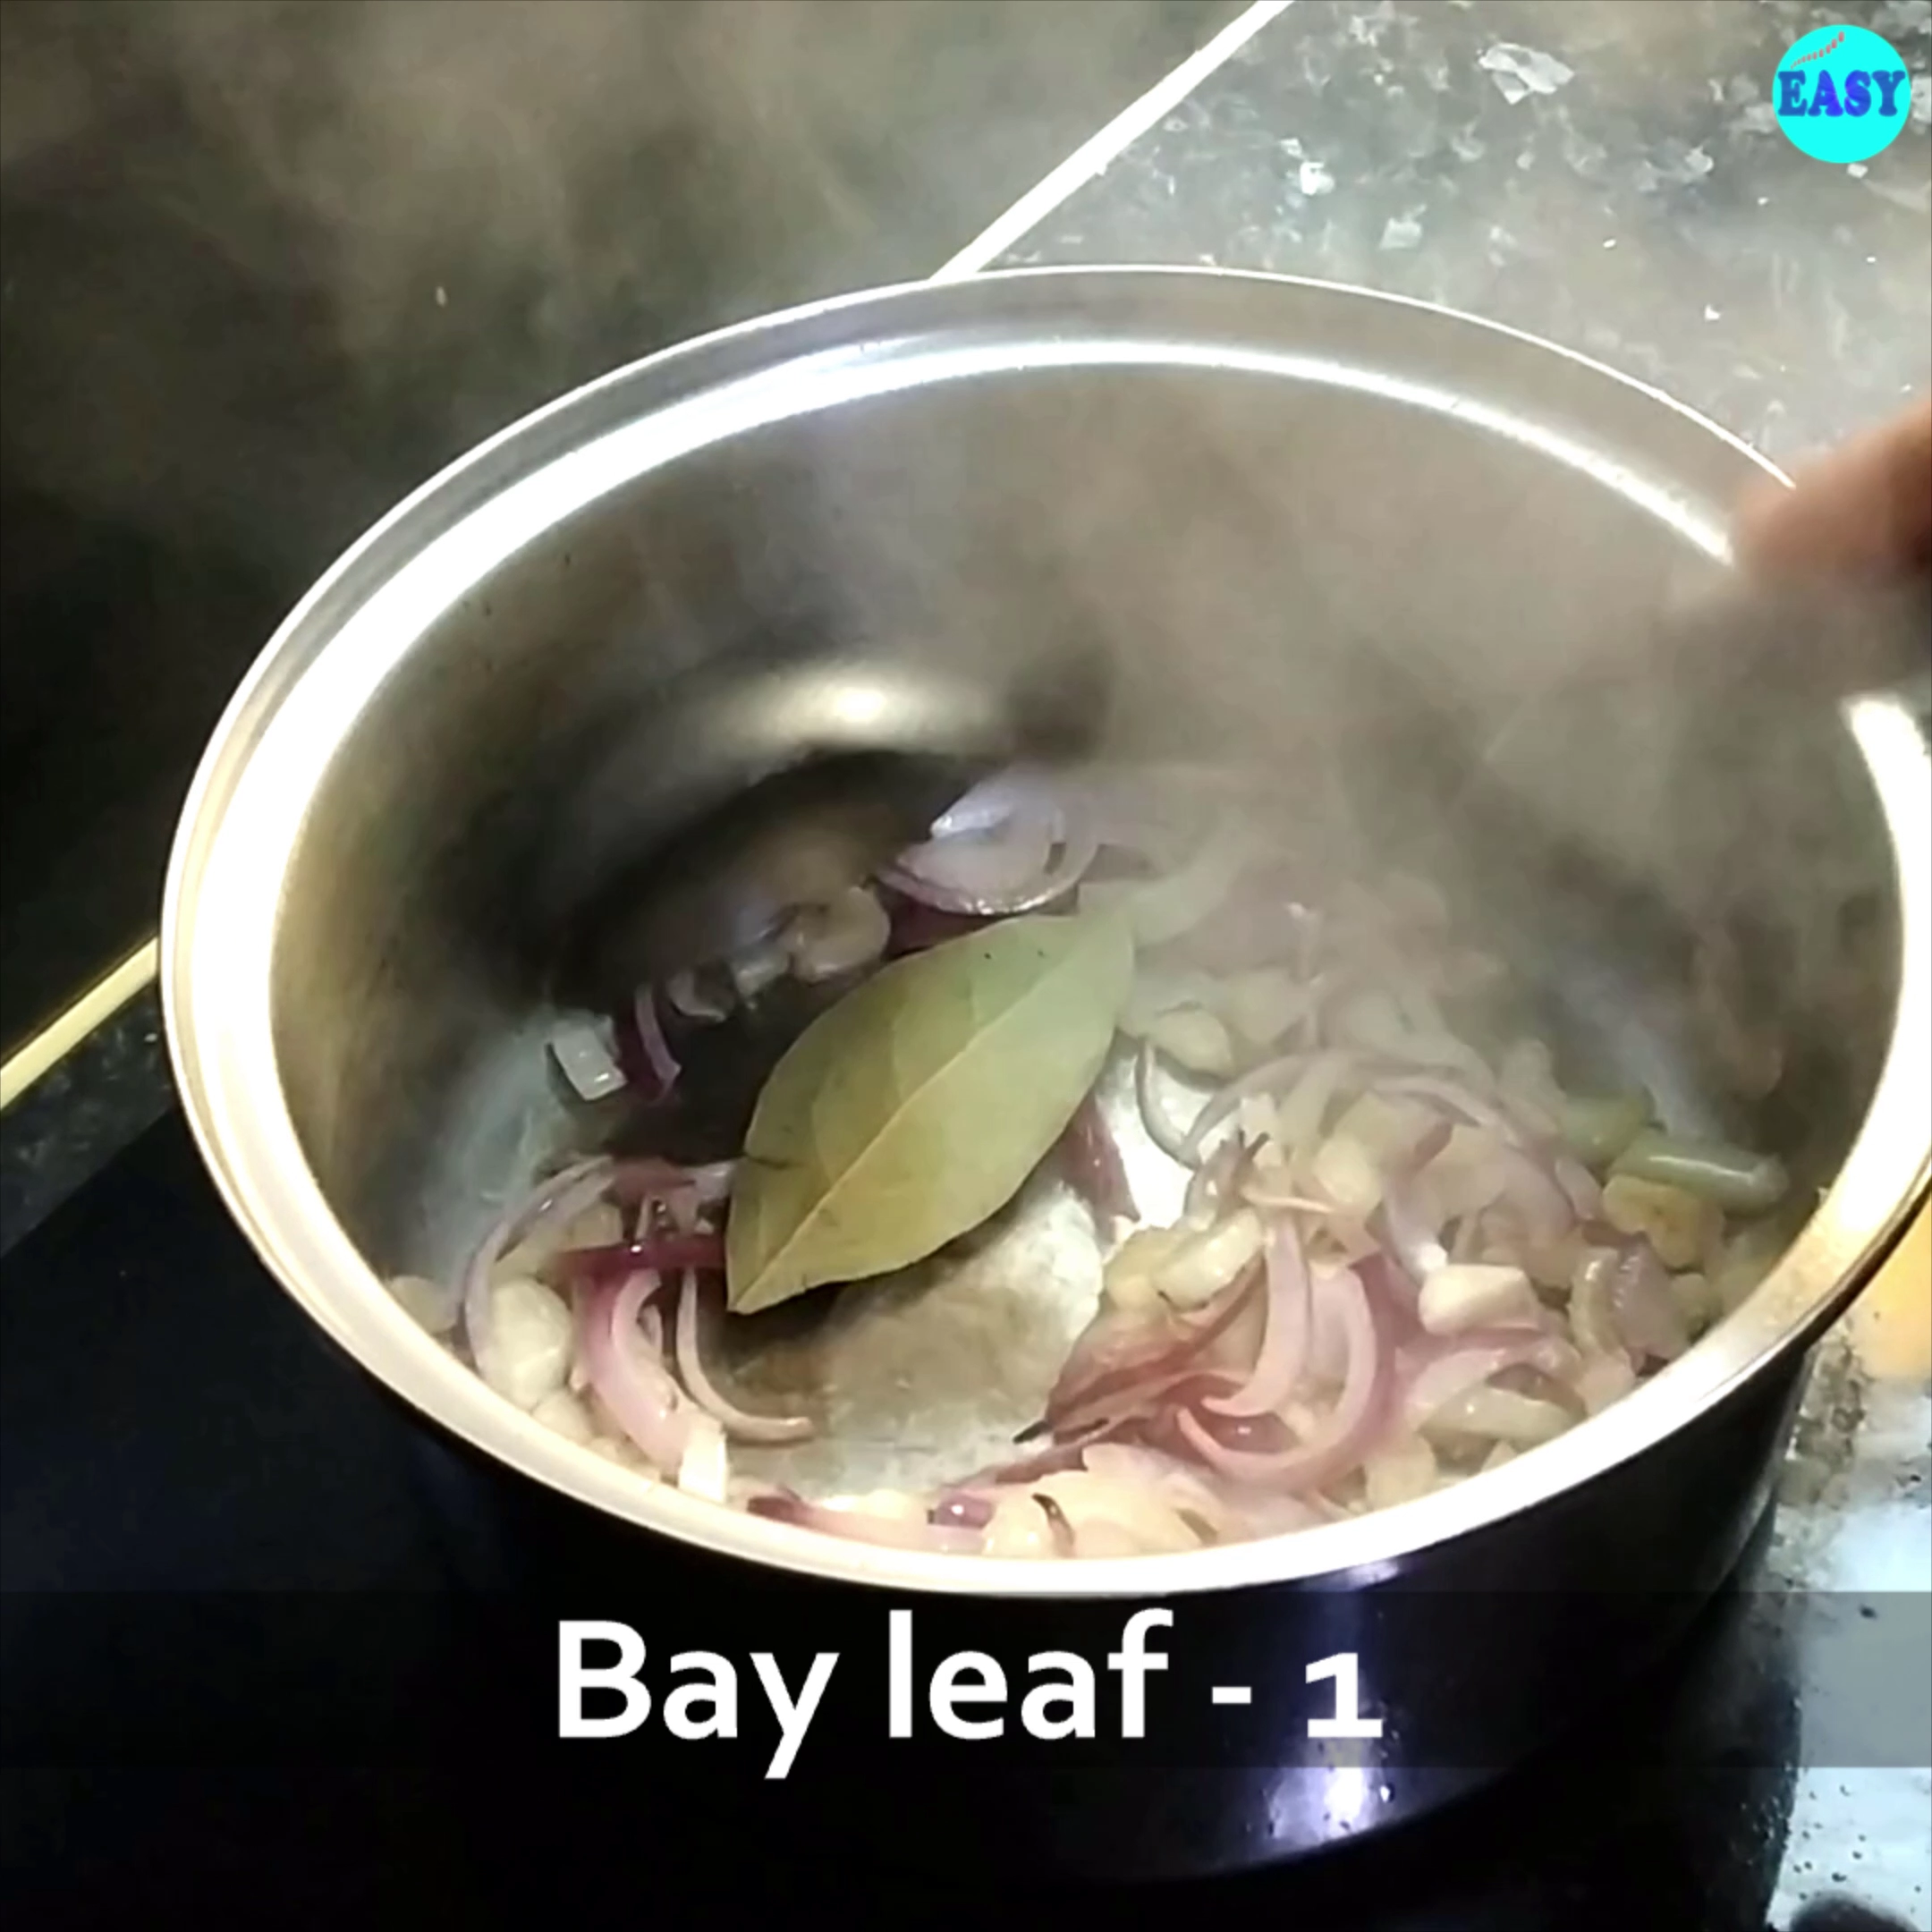 Step 2 - Add chopped onions, celery, garlic and bay leaf to it. Saute for few minutes until onion turns translucent.